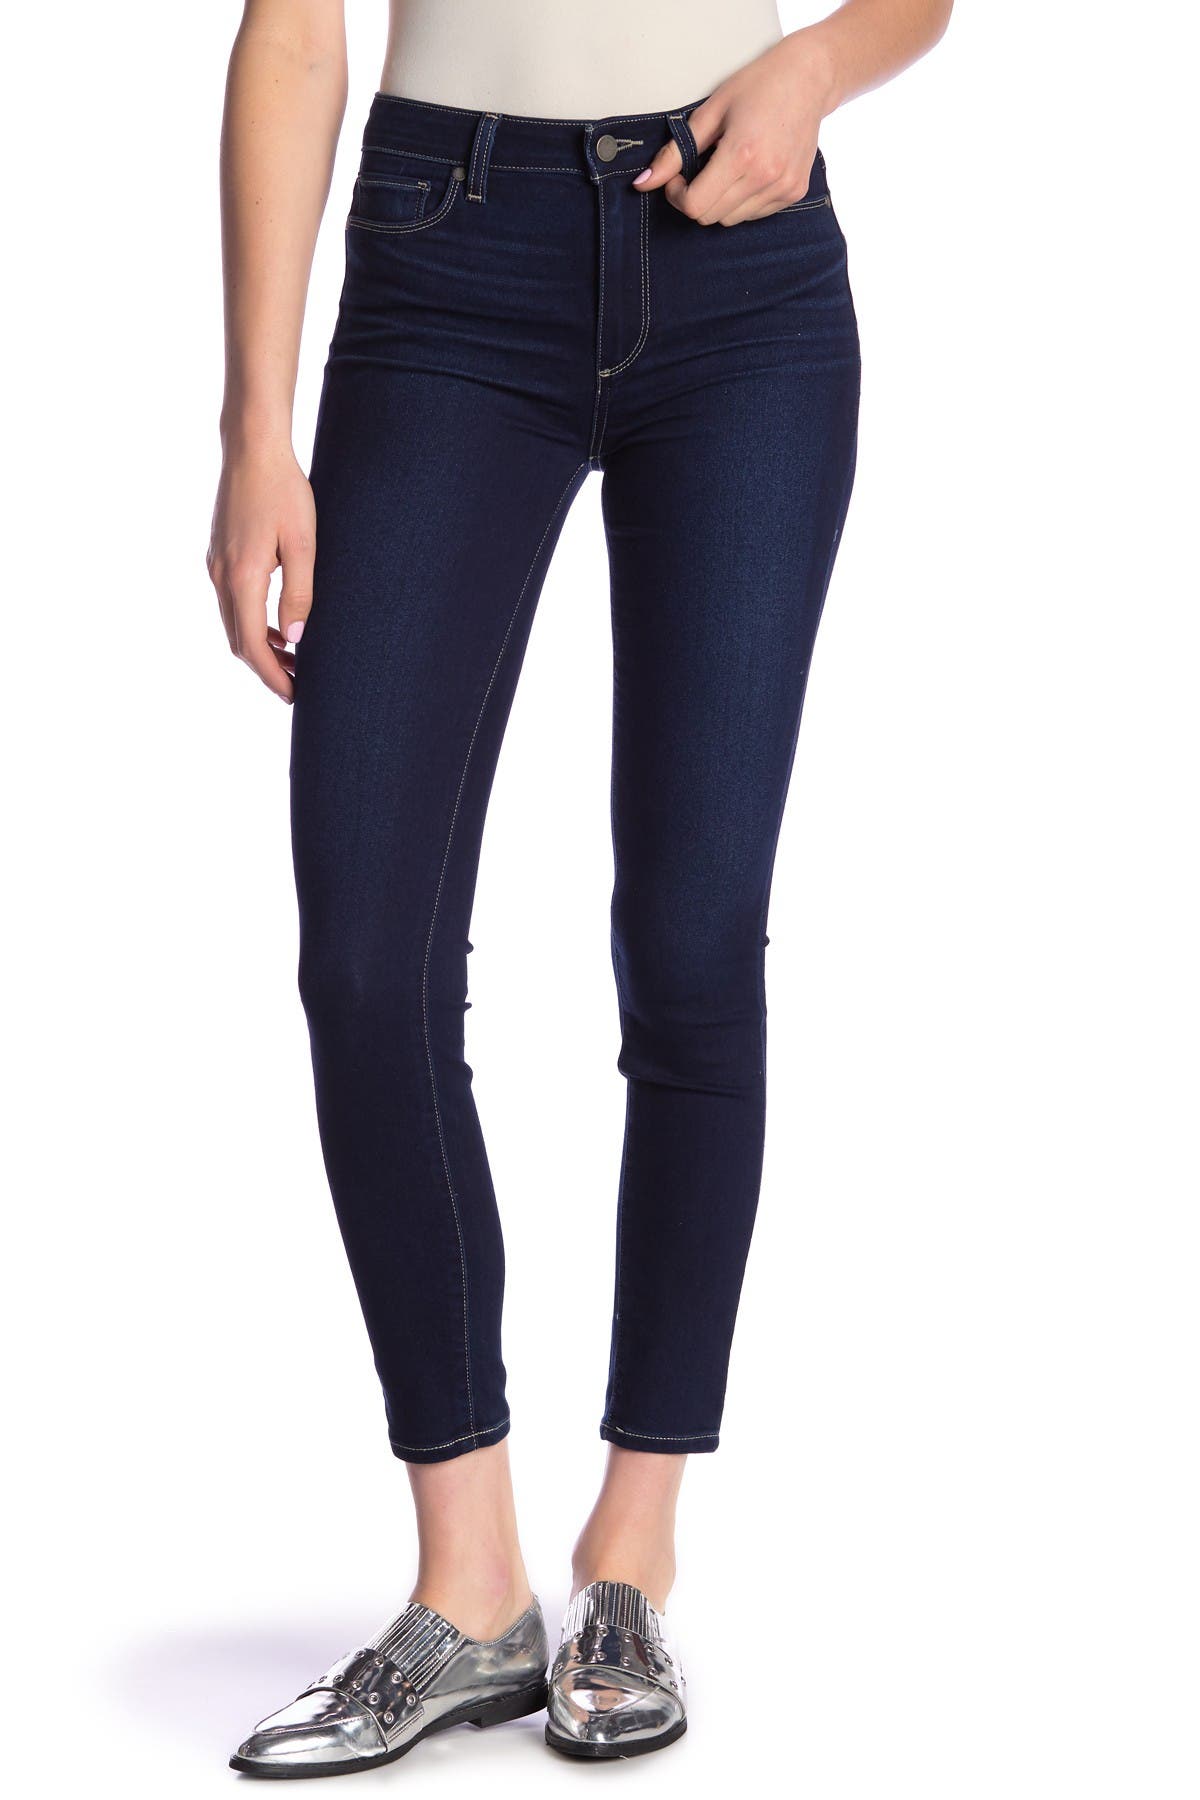 paige hoxton high rise ankle jeans